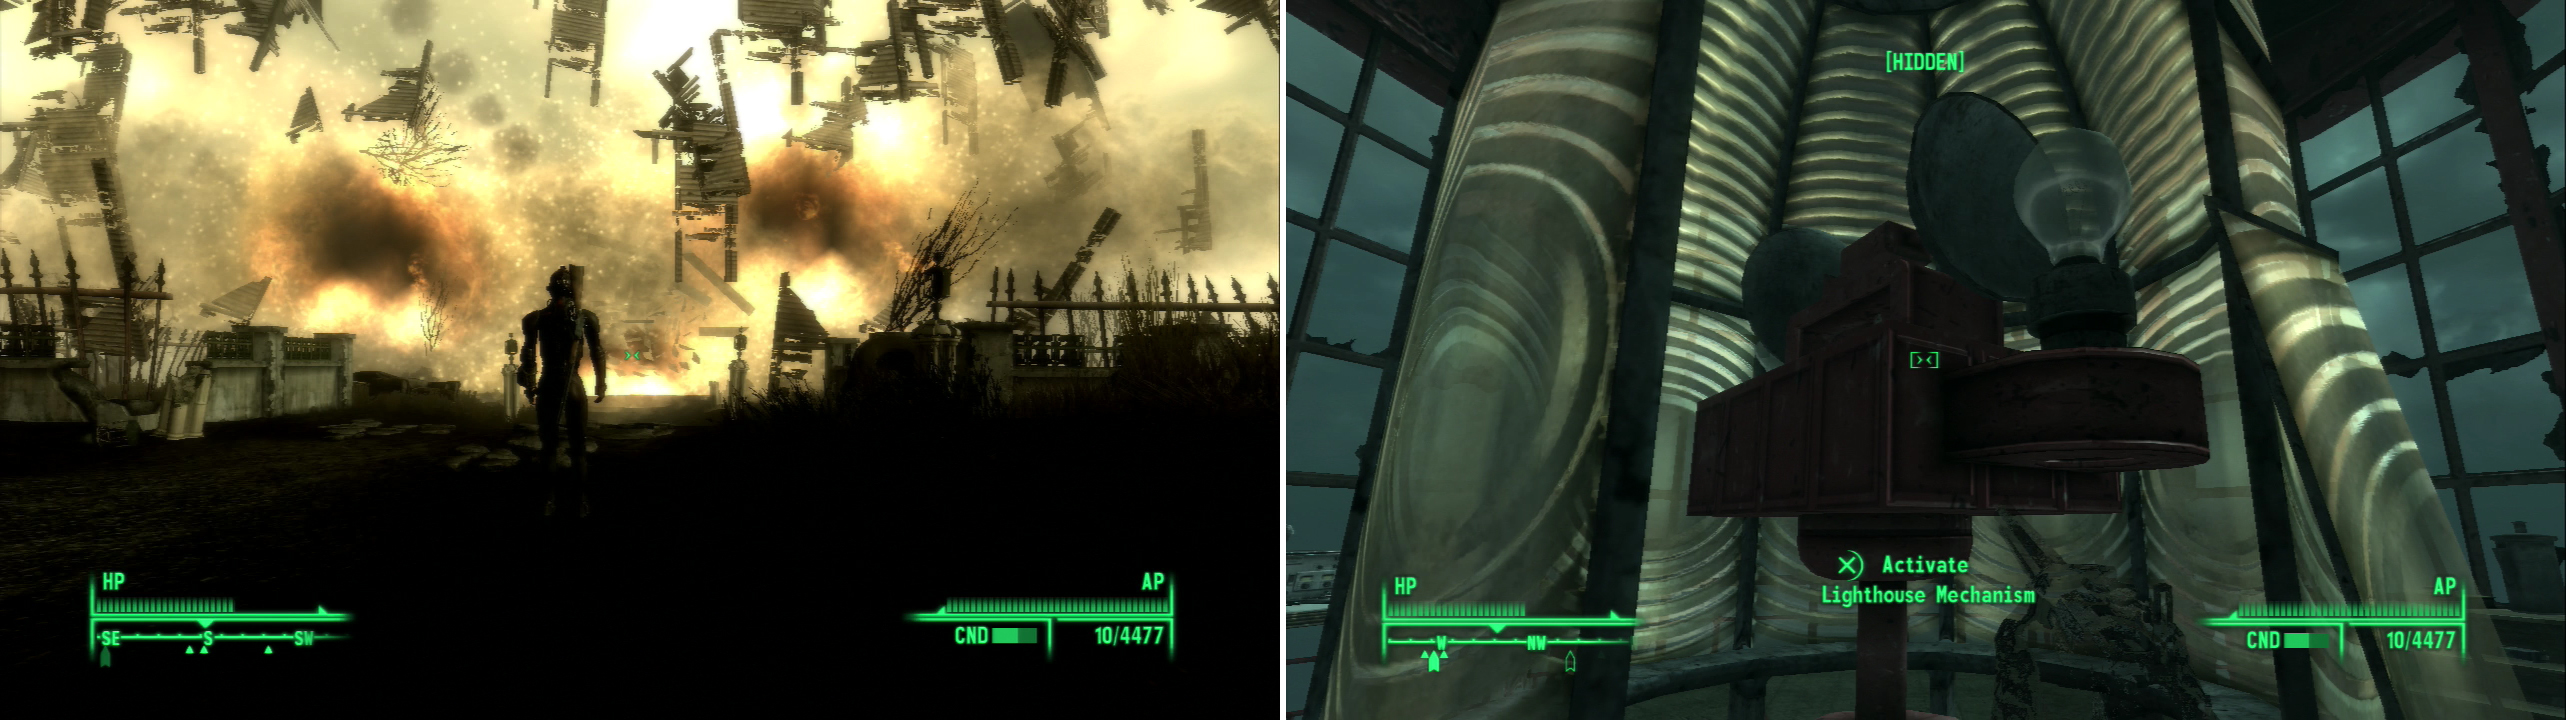 The Desmond-Calvert feud intensifies explosively (left). On your way to Calvert’s hideout, be a good samaritan and replace the Lighthouse Bulb (right).